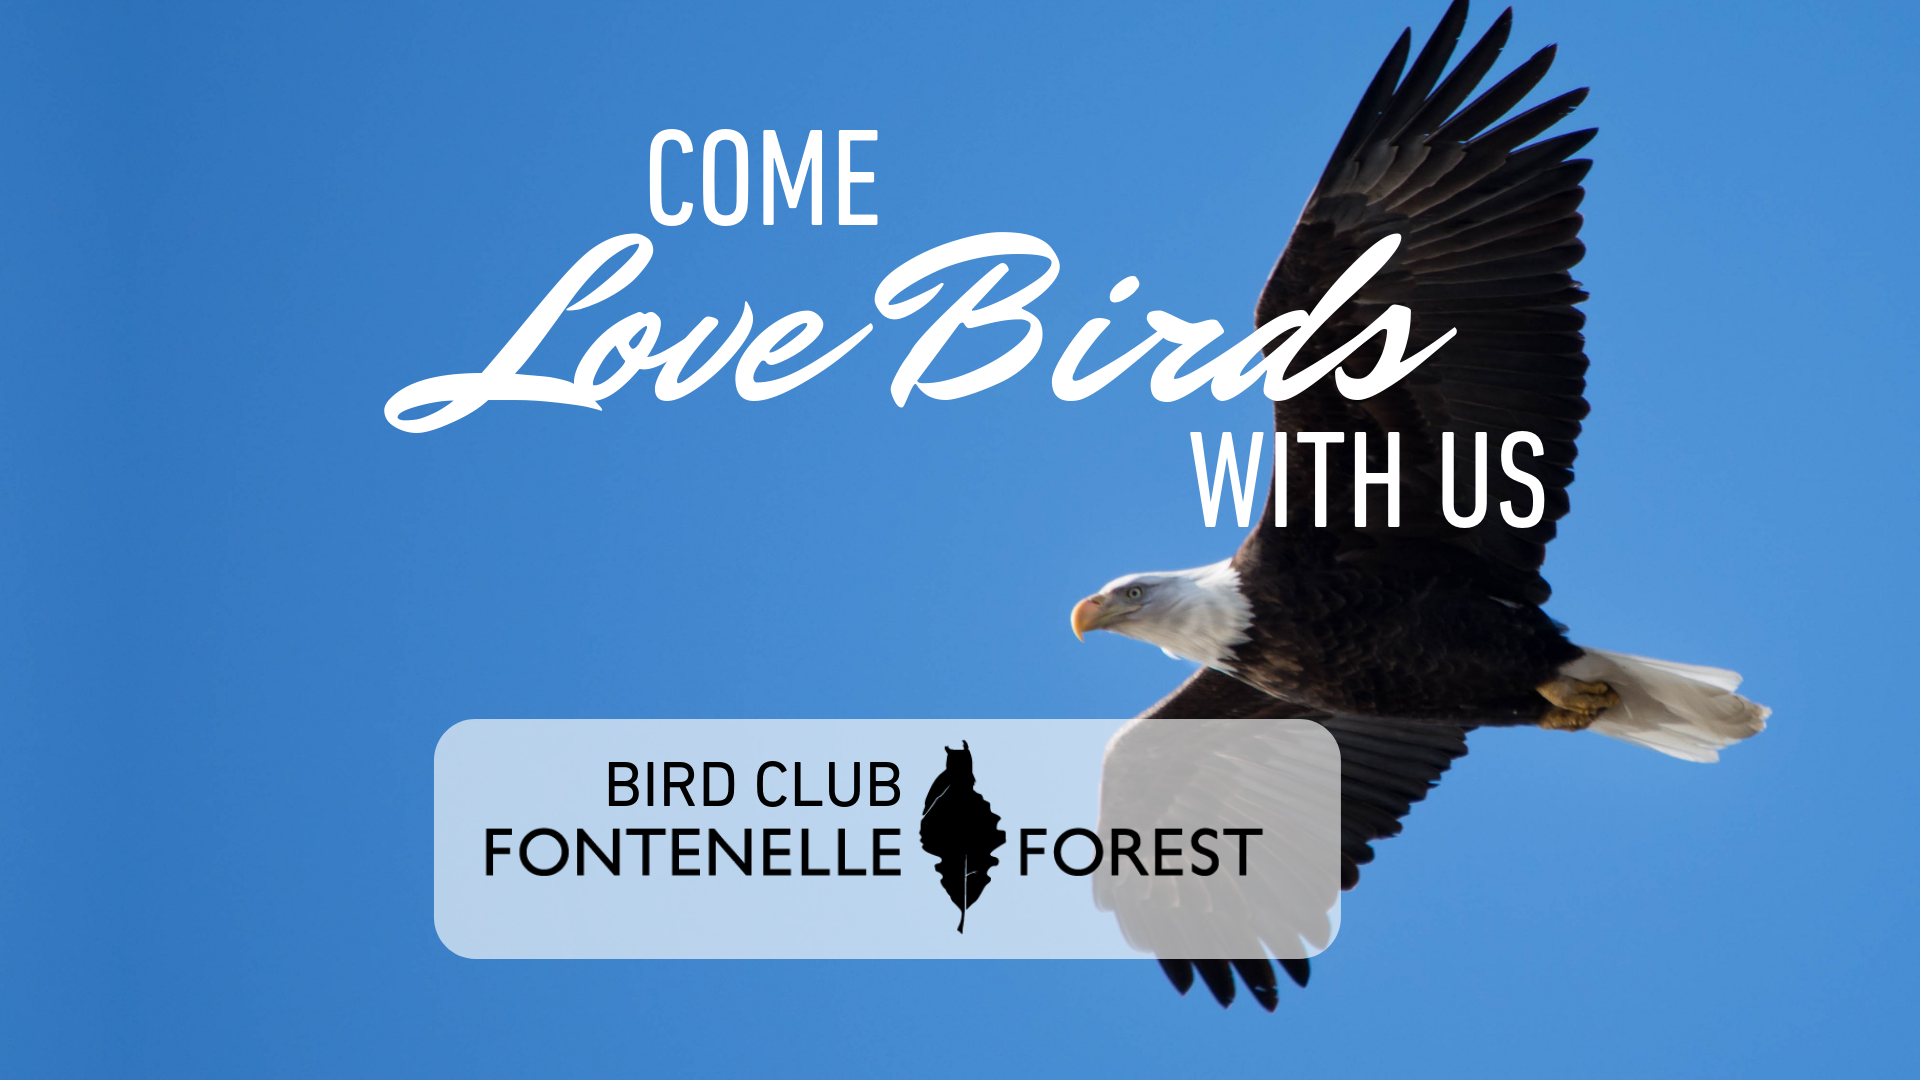 Come Love Birds with Us graphic